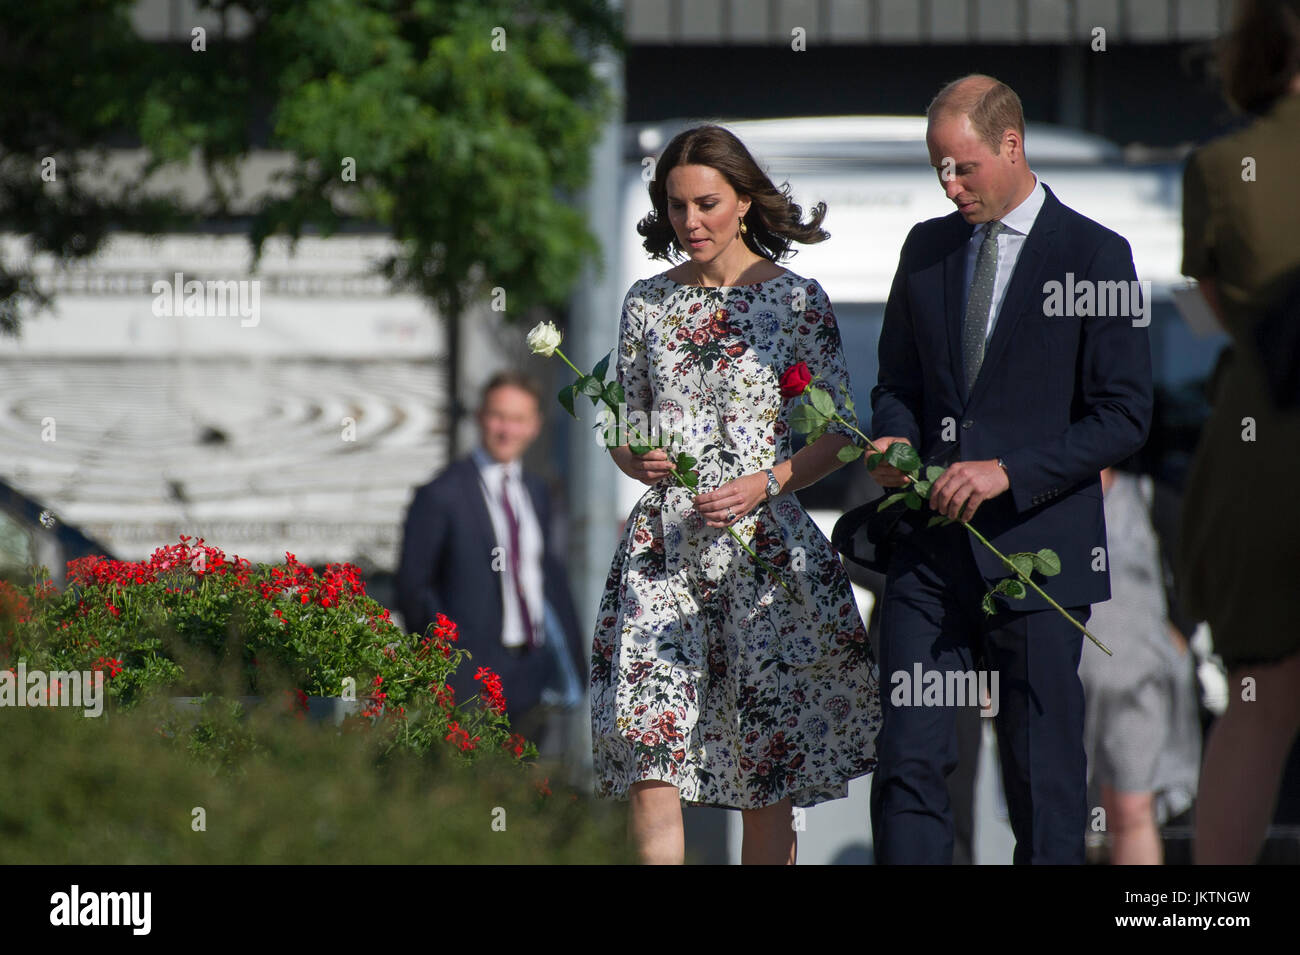 Prince William Duke of Cambridge and Catherine Duchess of Cambridge during their visit in Gdansk, Poland 18 July 2017 © Wojciech Strozyk / Alamy Stock Stock Photo